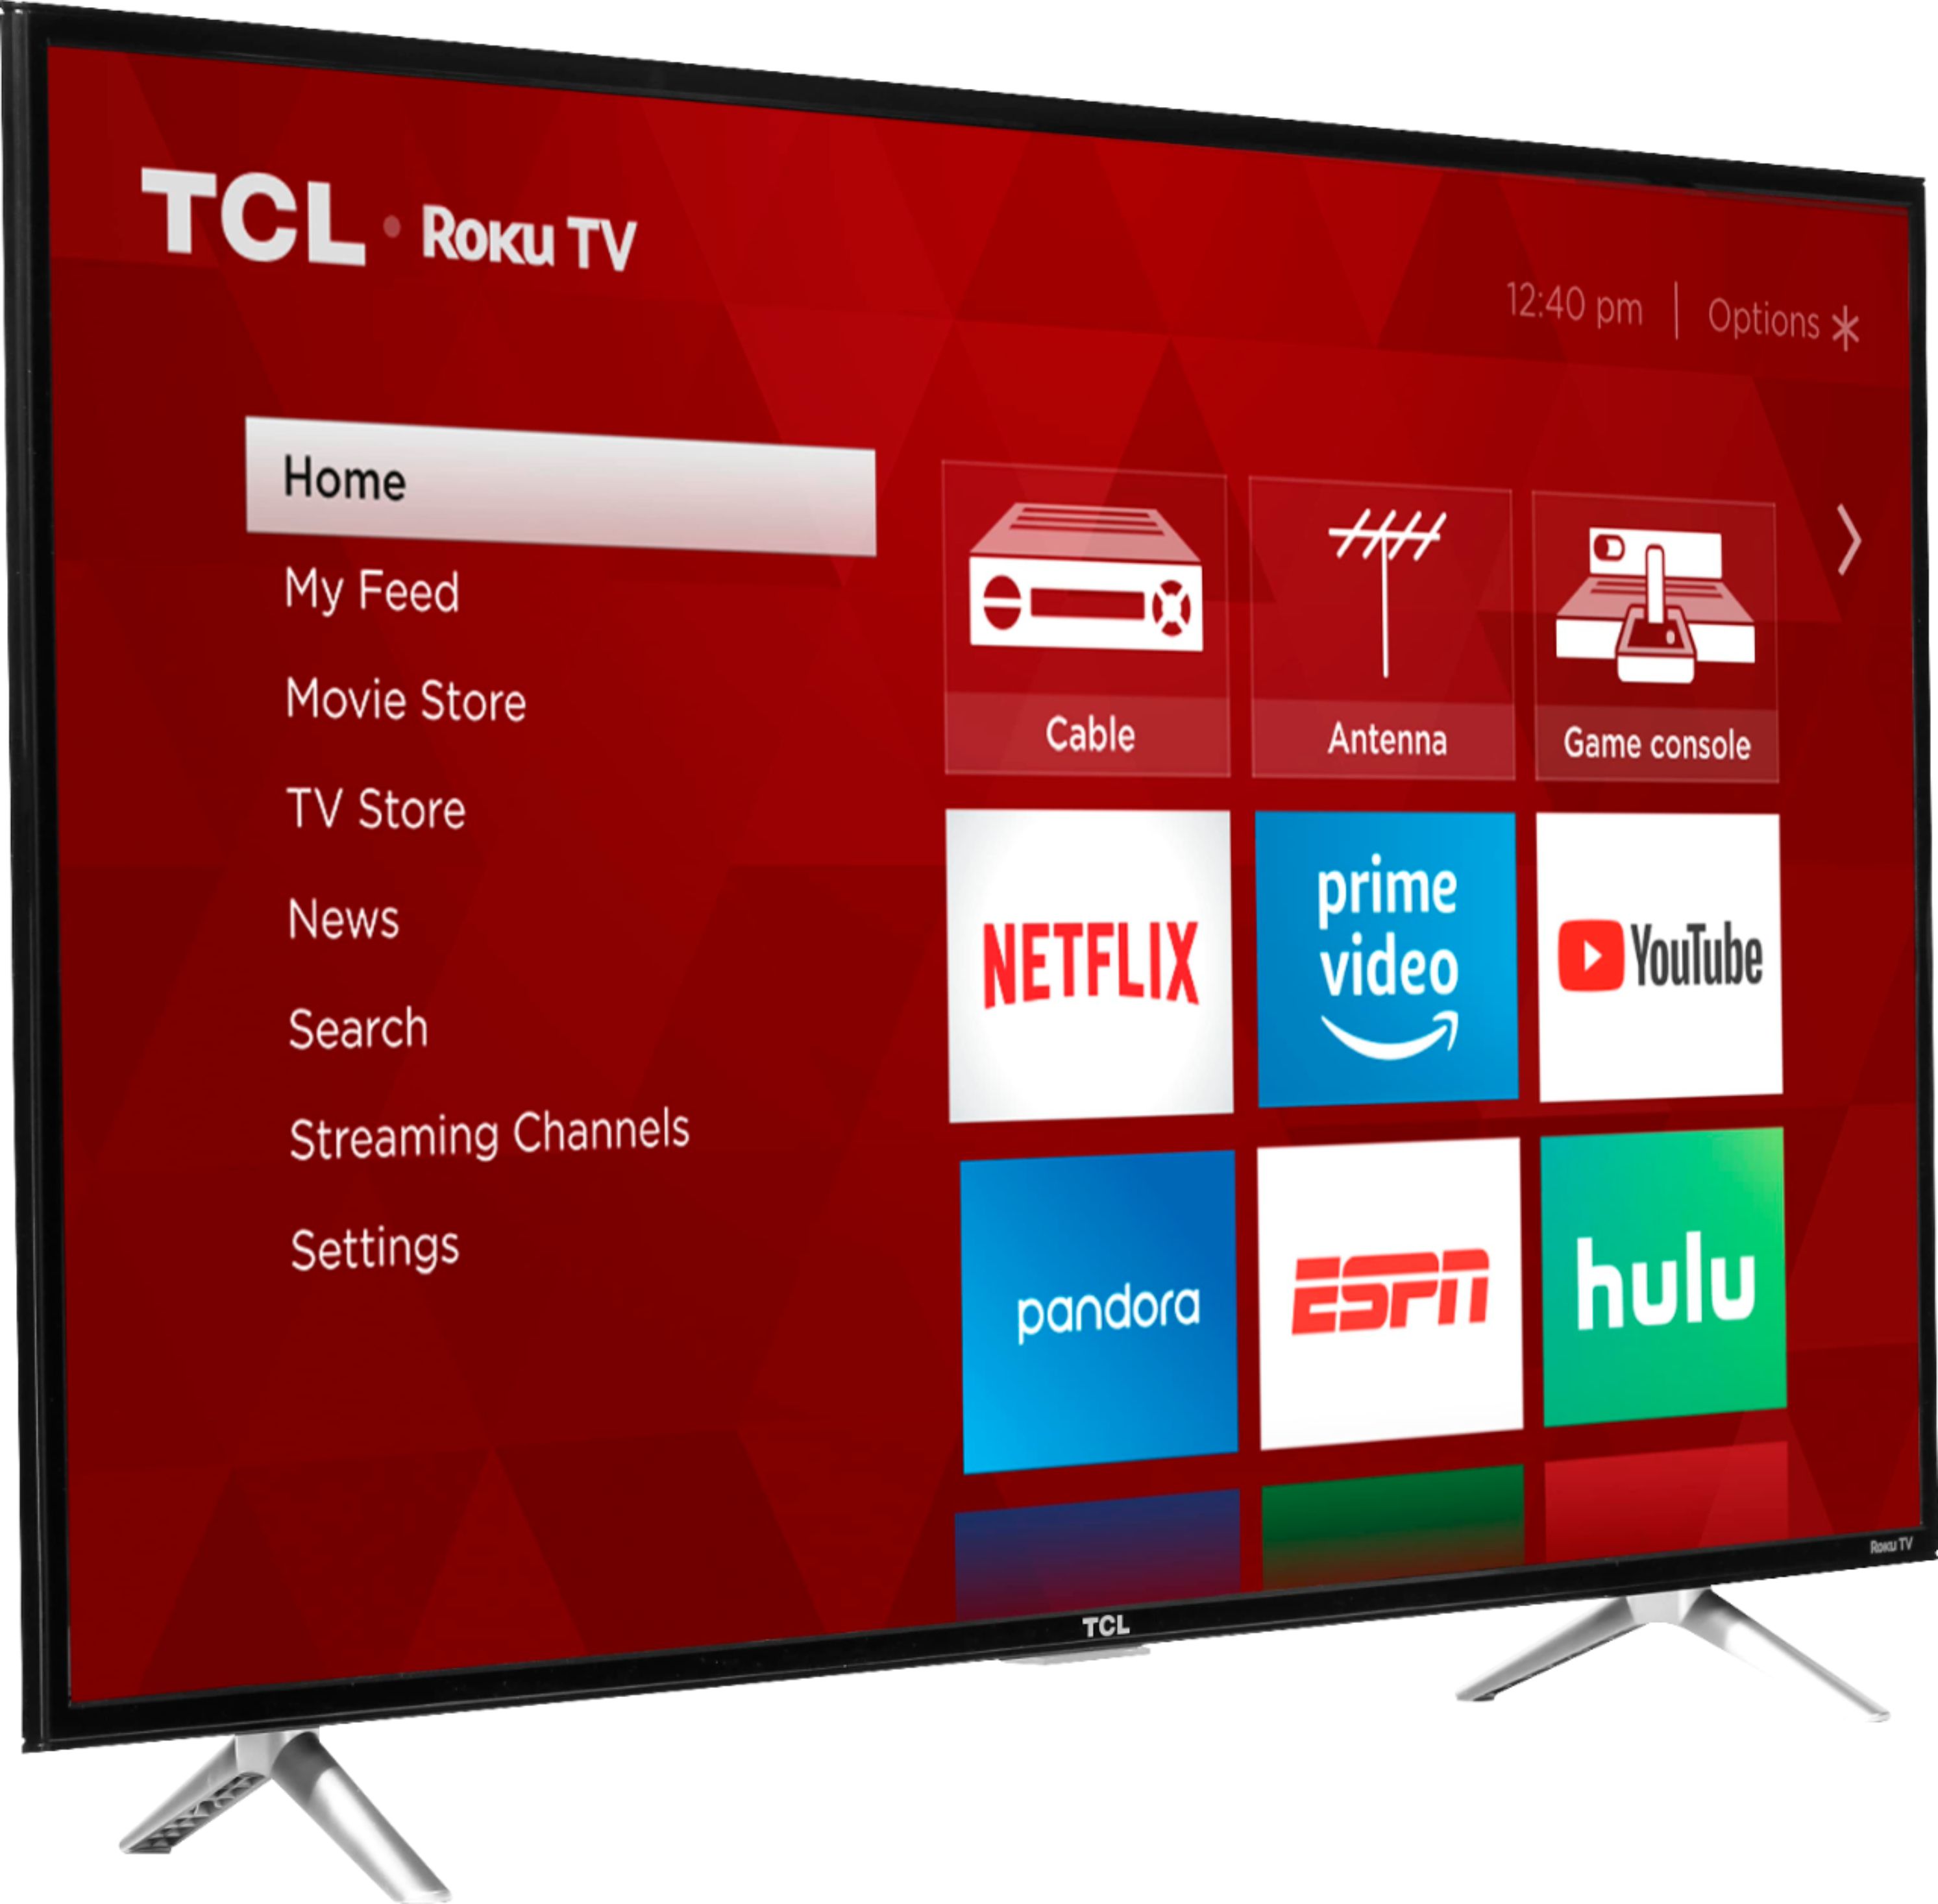 tcl roku tv 32 not connecting to wifi